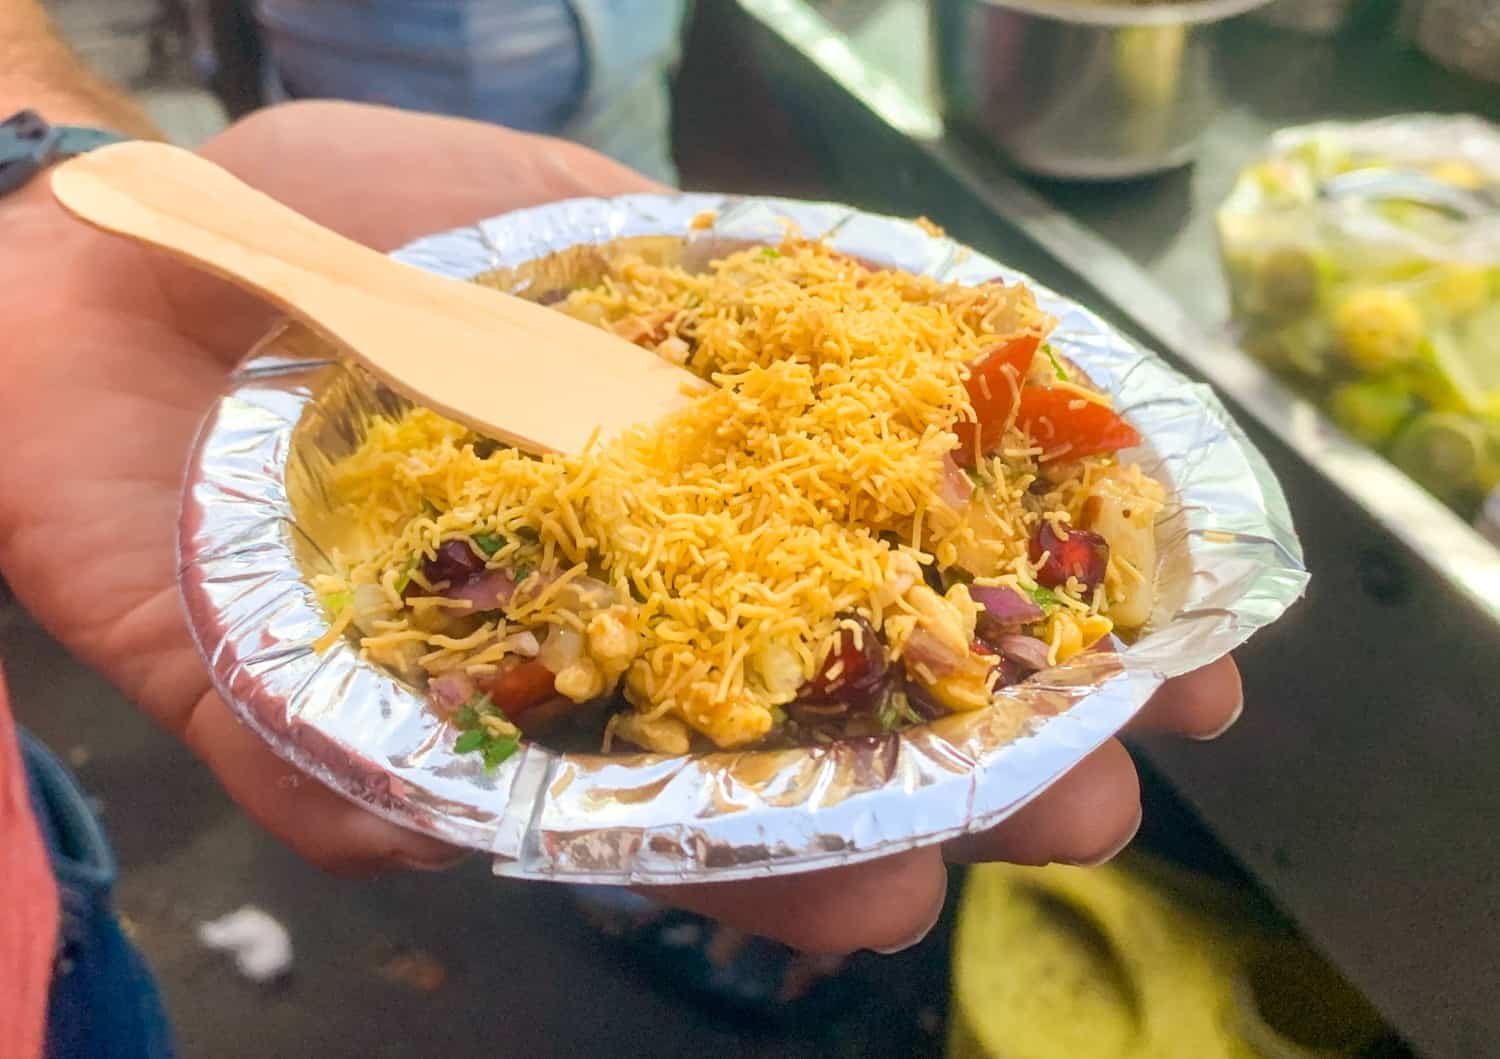 Hand holding Indian street food